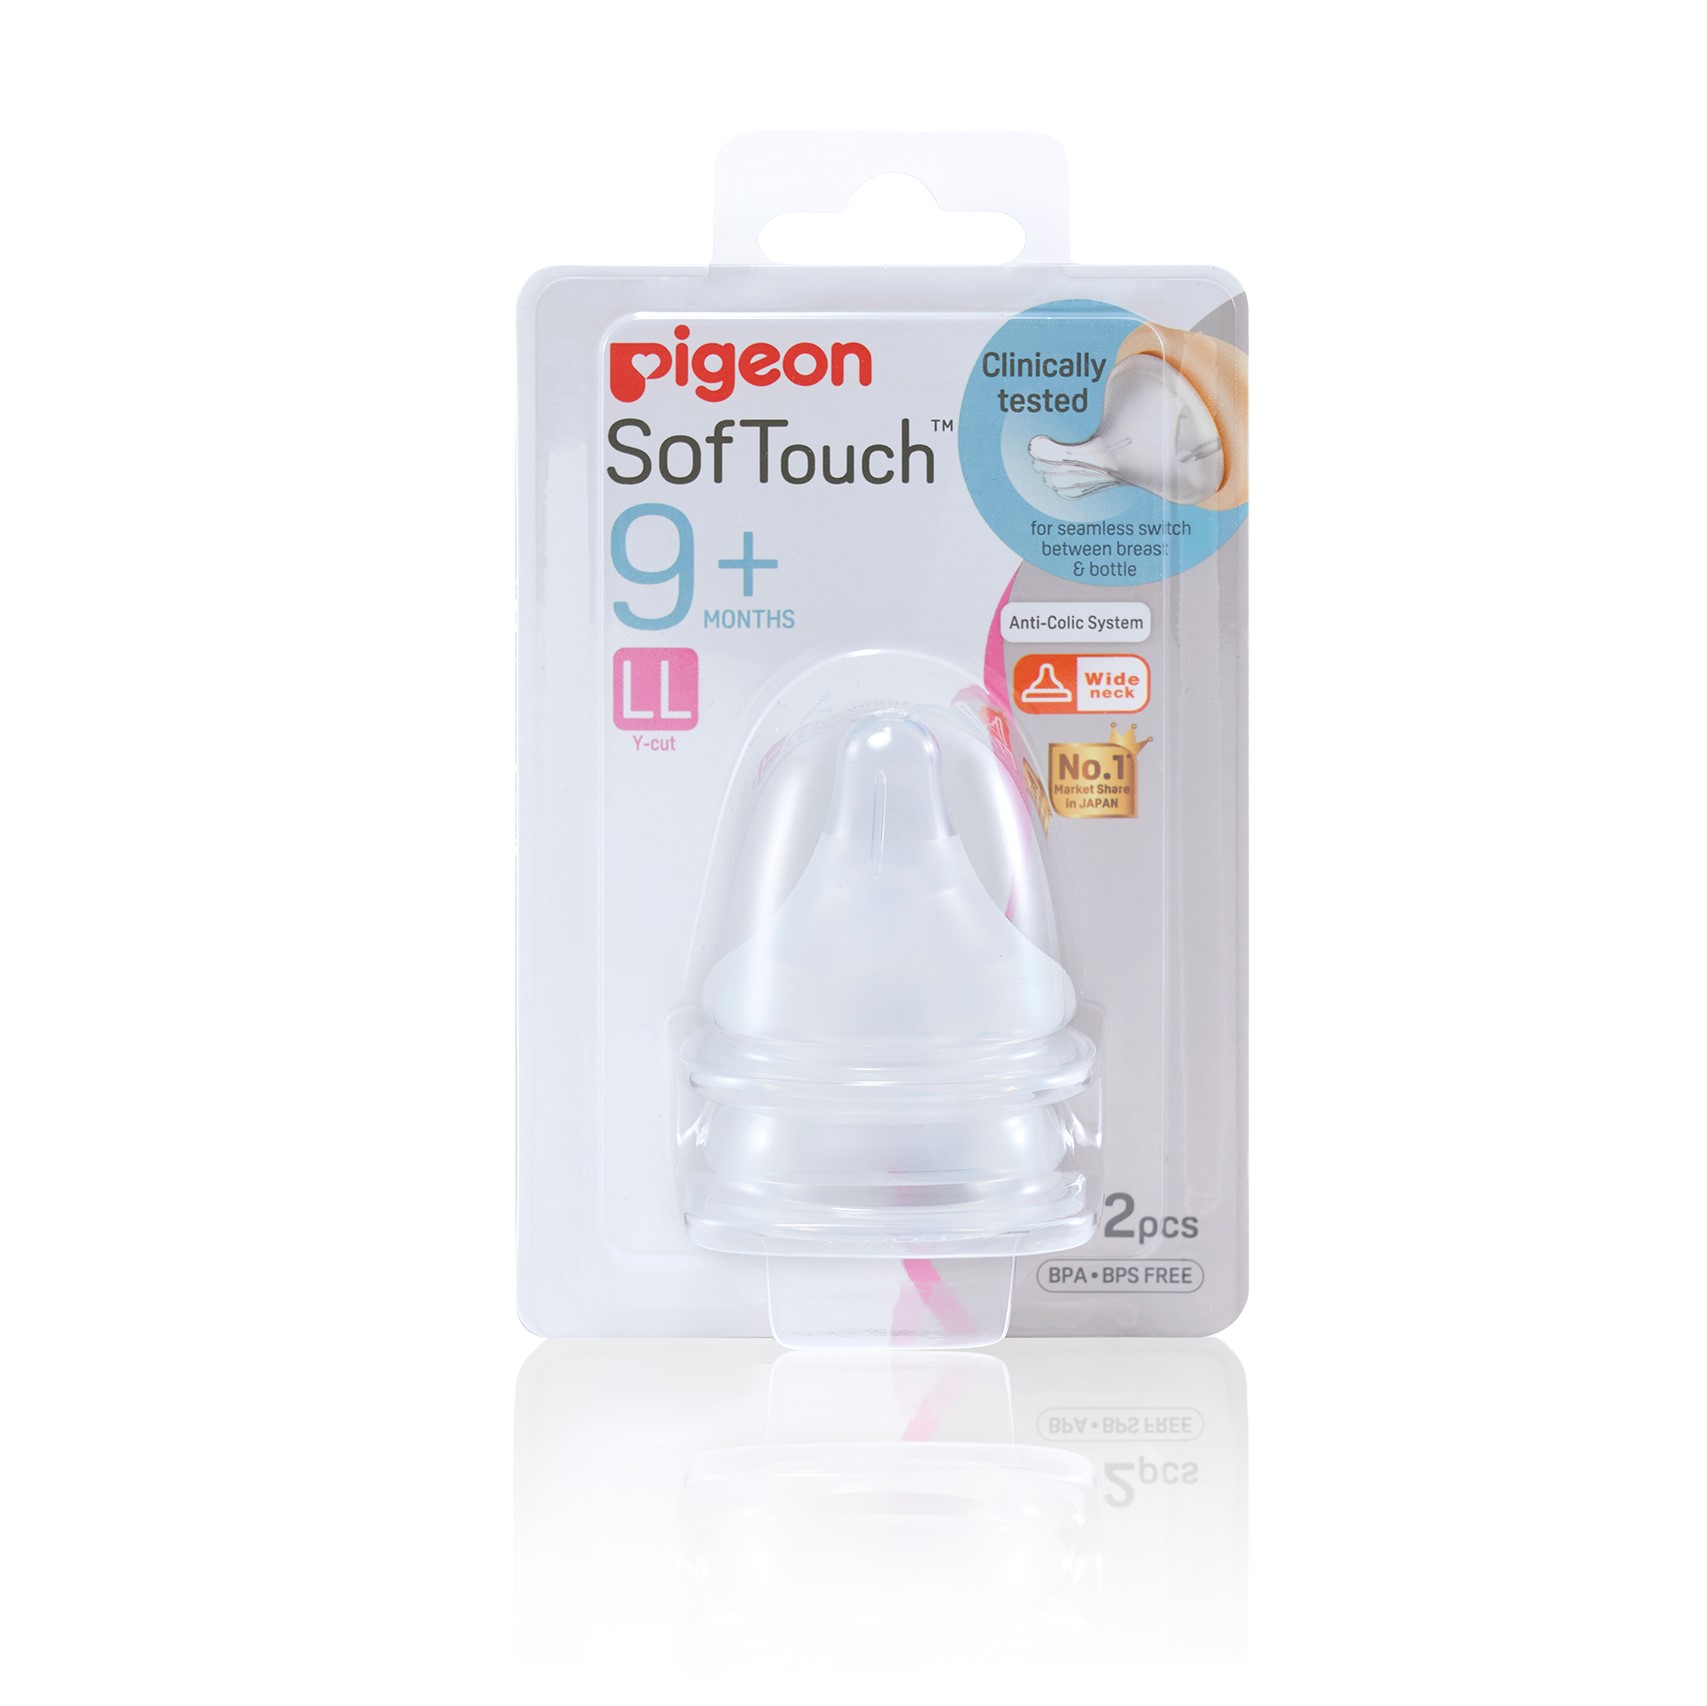 baby-fairPigeon SofTouch Nipple Blister Pack 2Pcs (LL) (PG-78482)